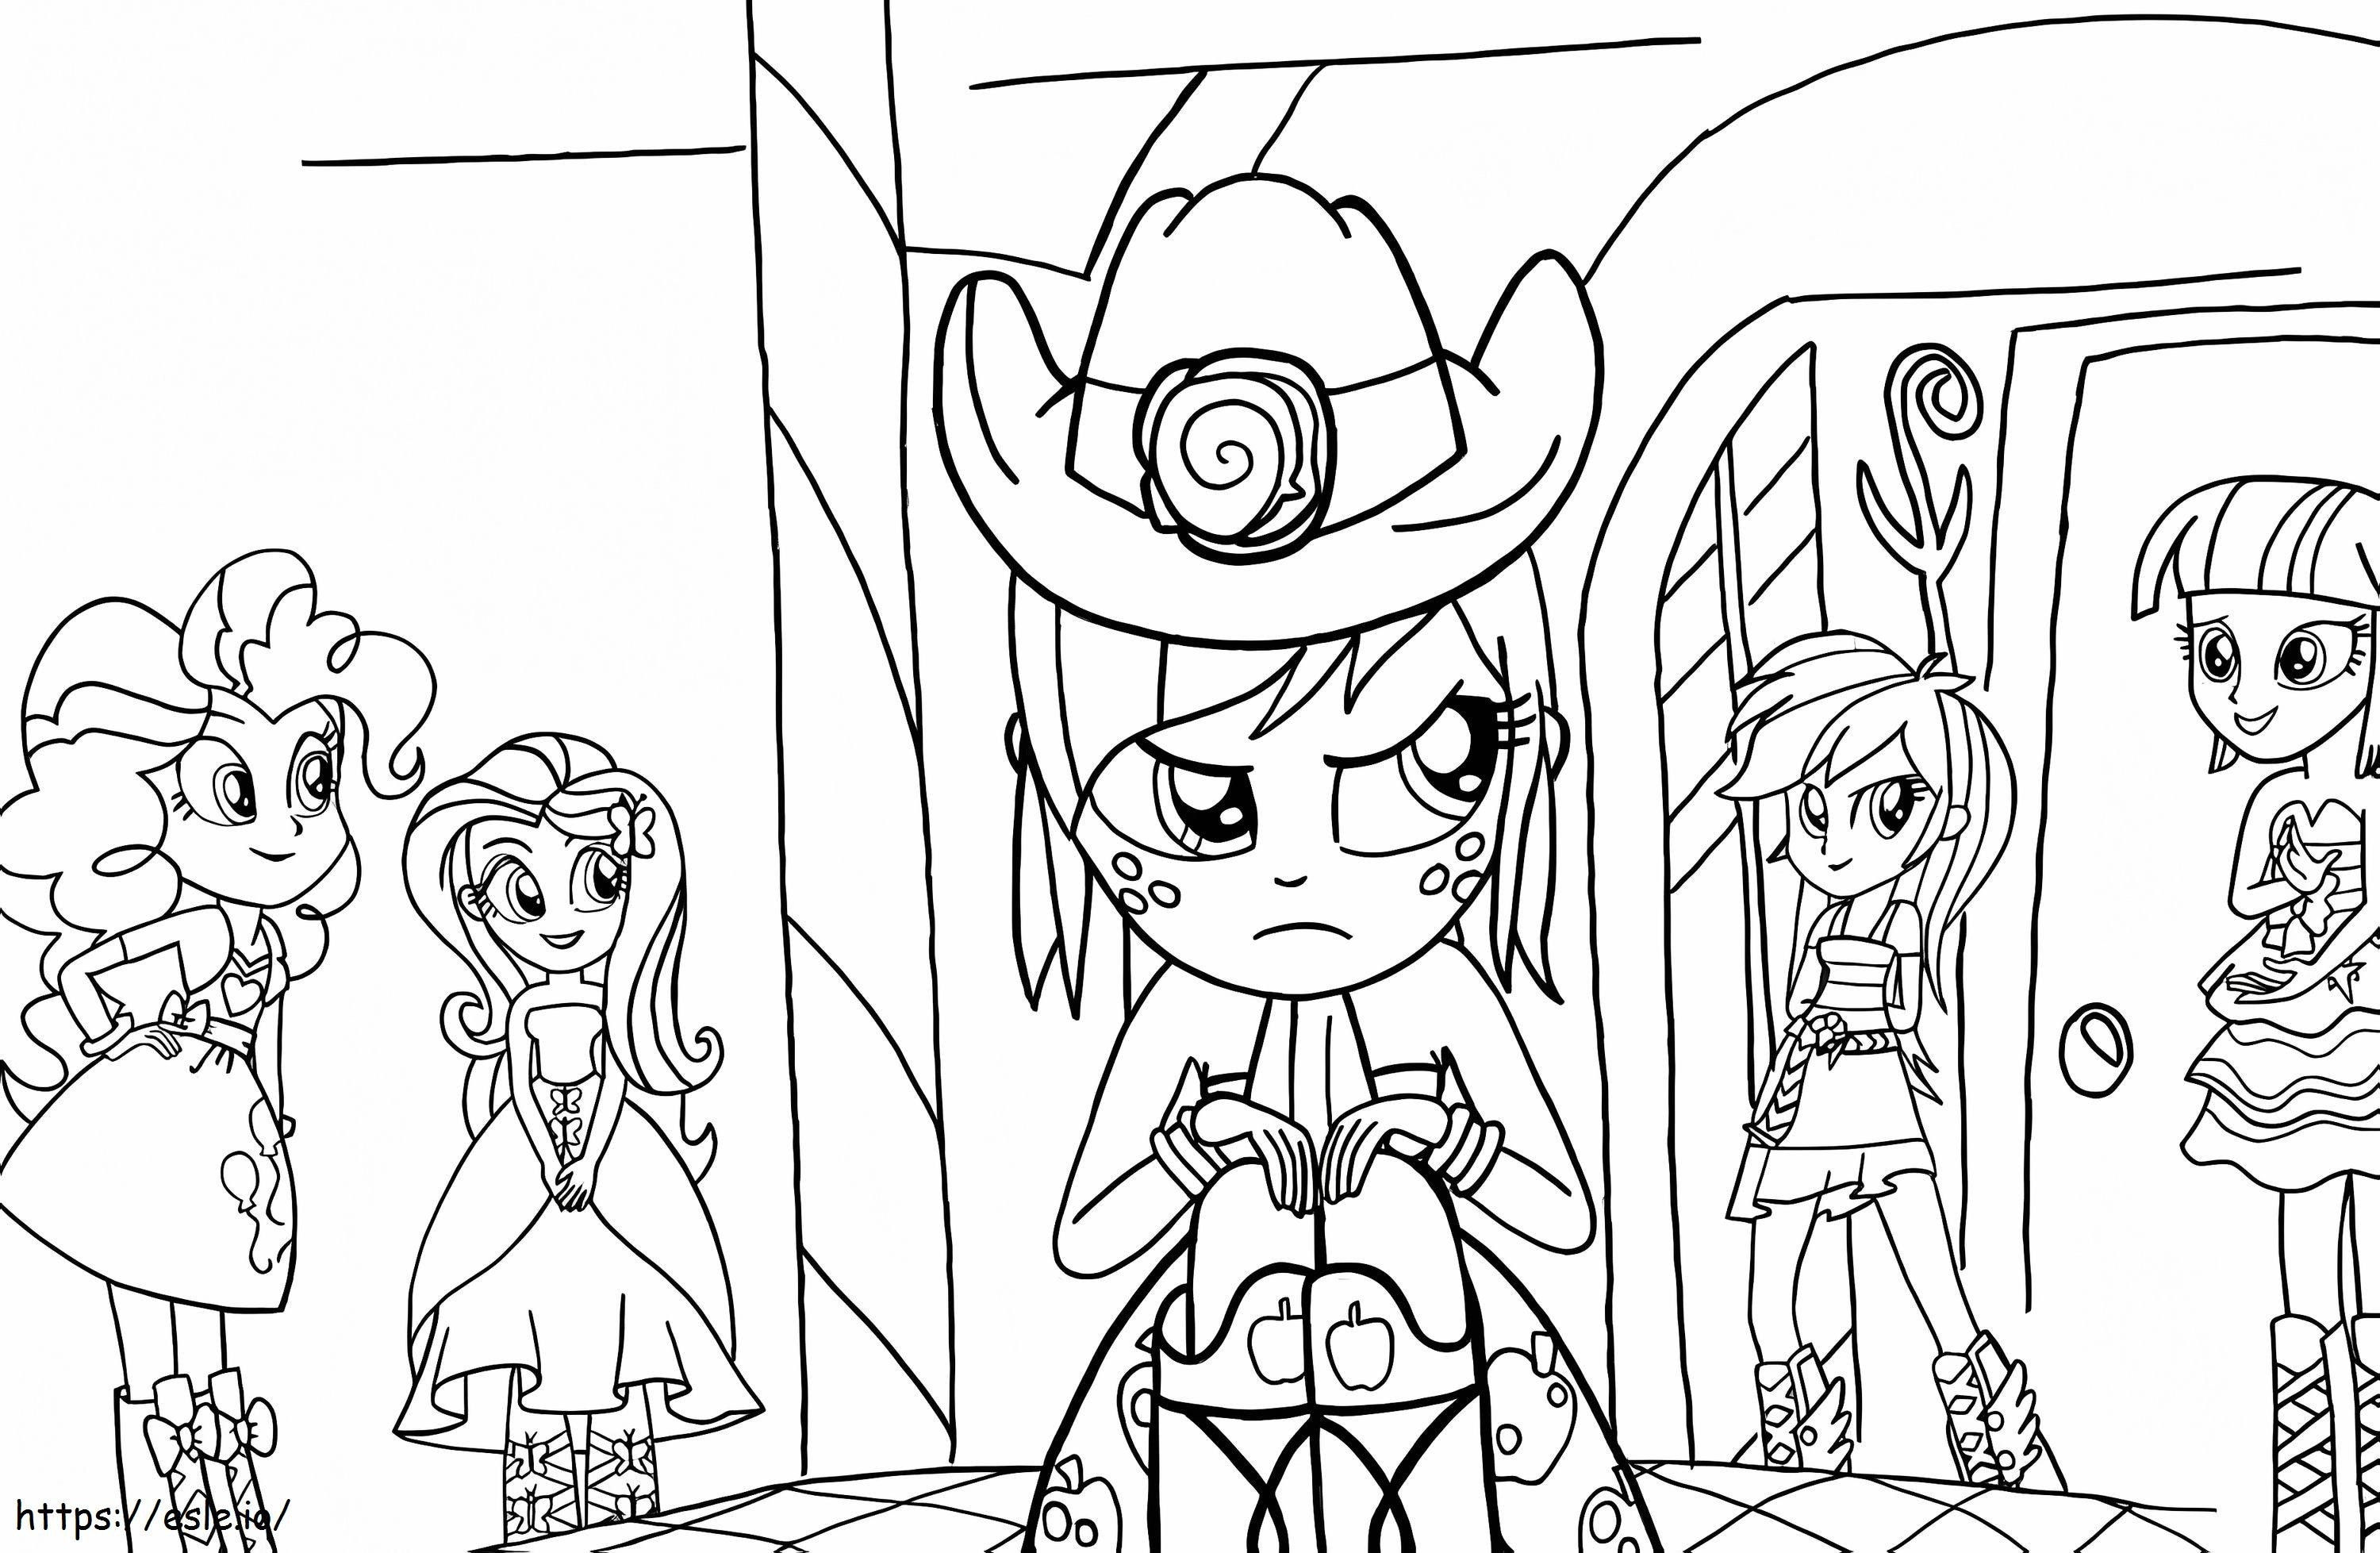 Equestria Girls 27 coloring page